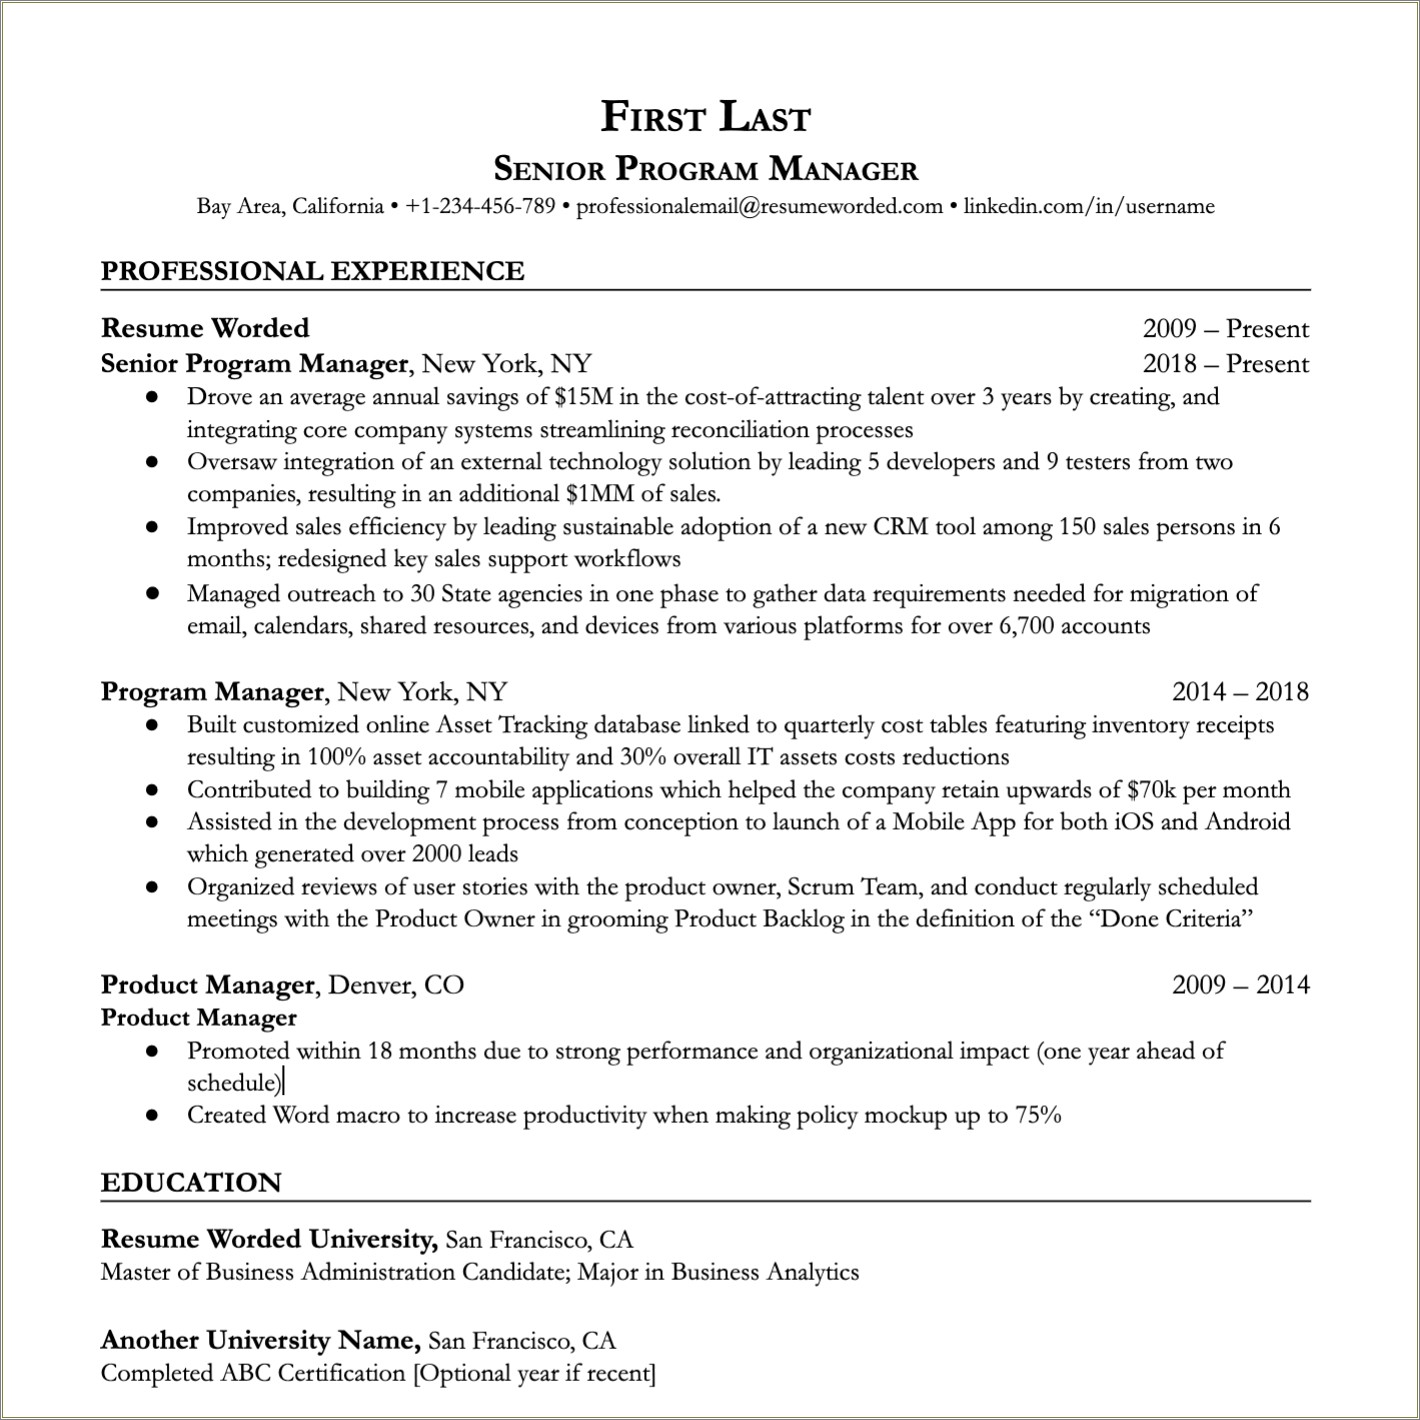 Order Of Job Experience On Resume